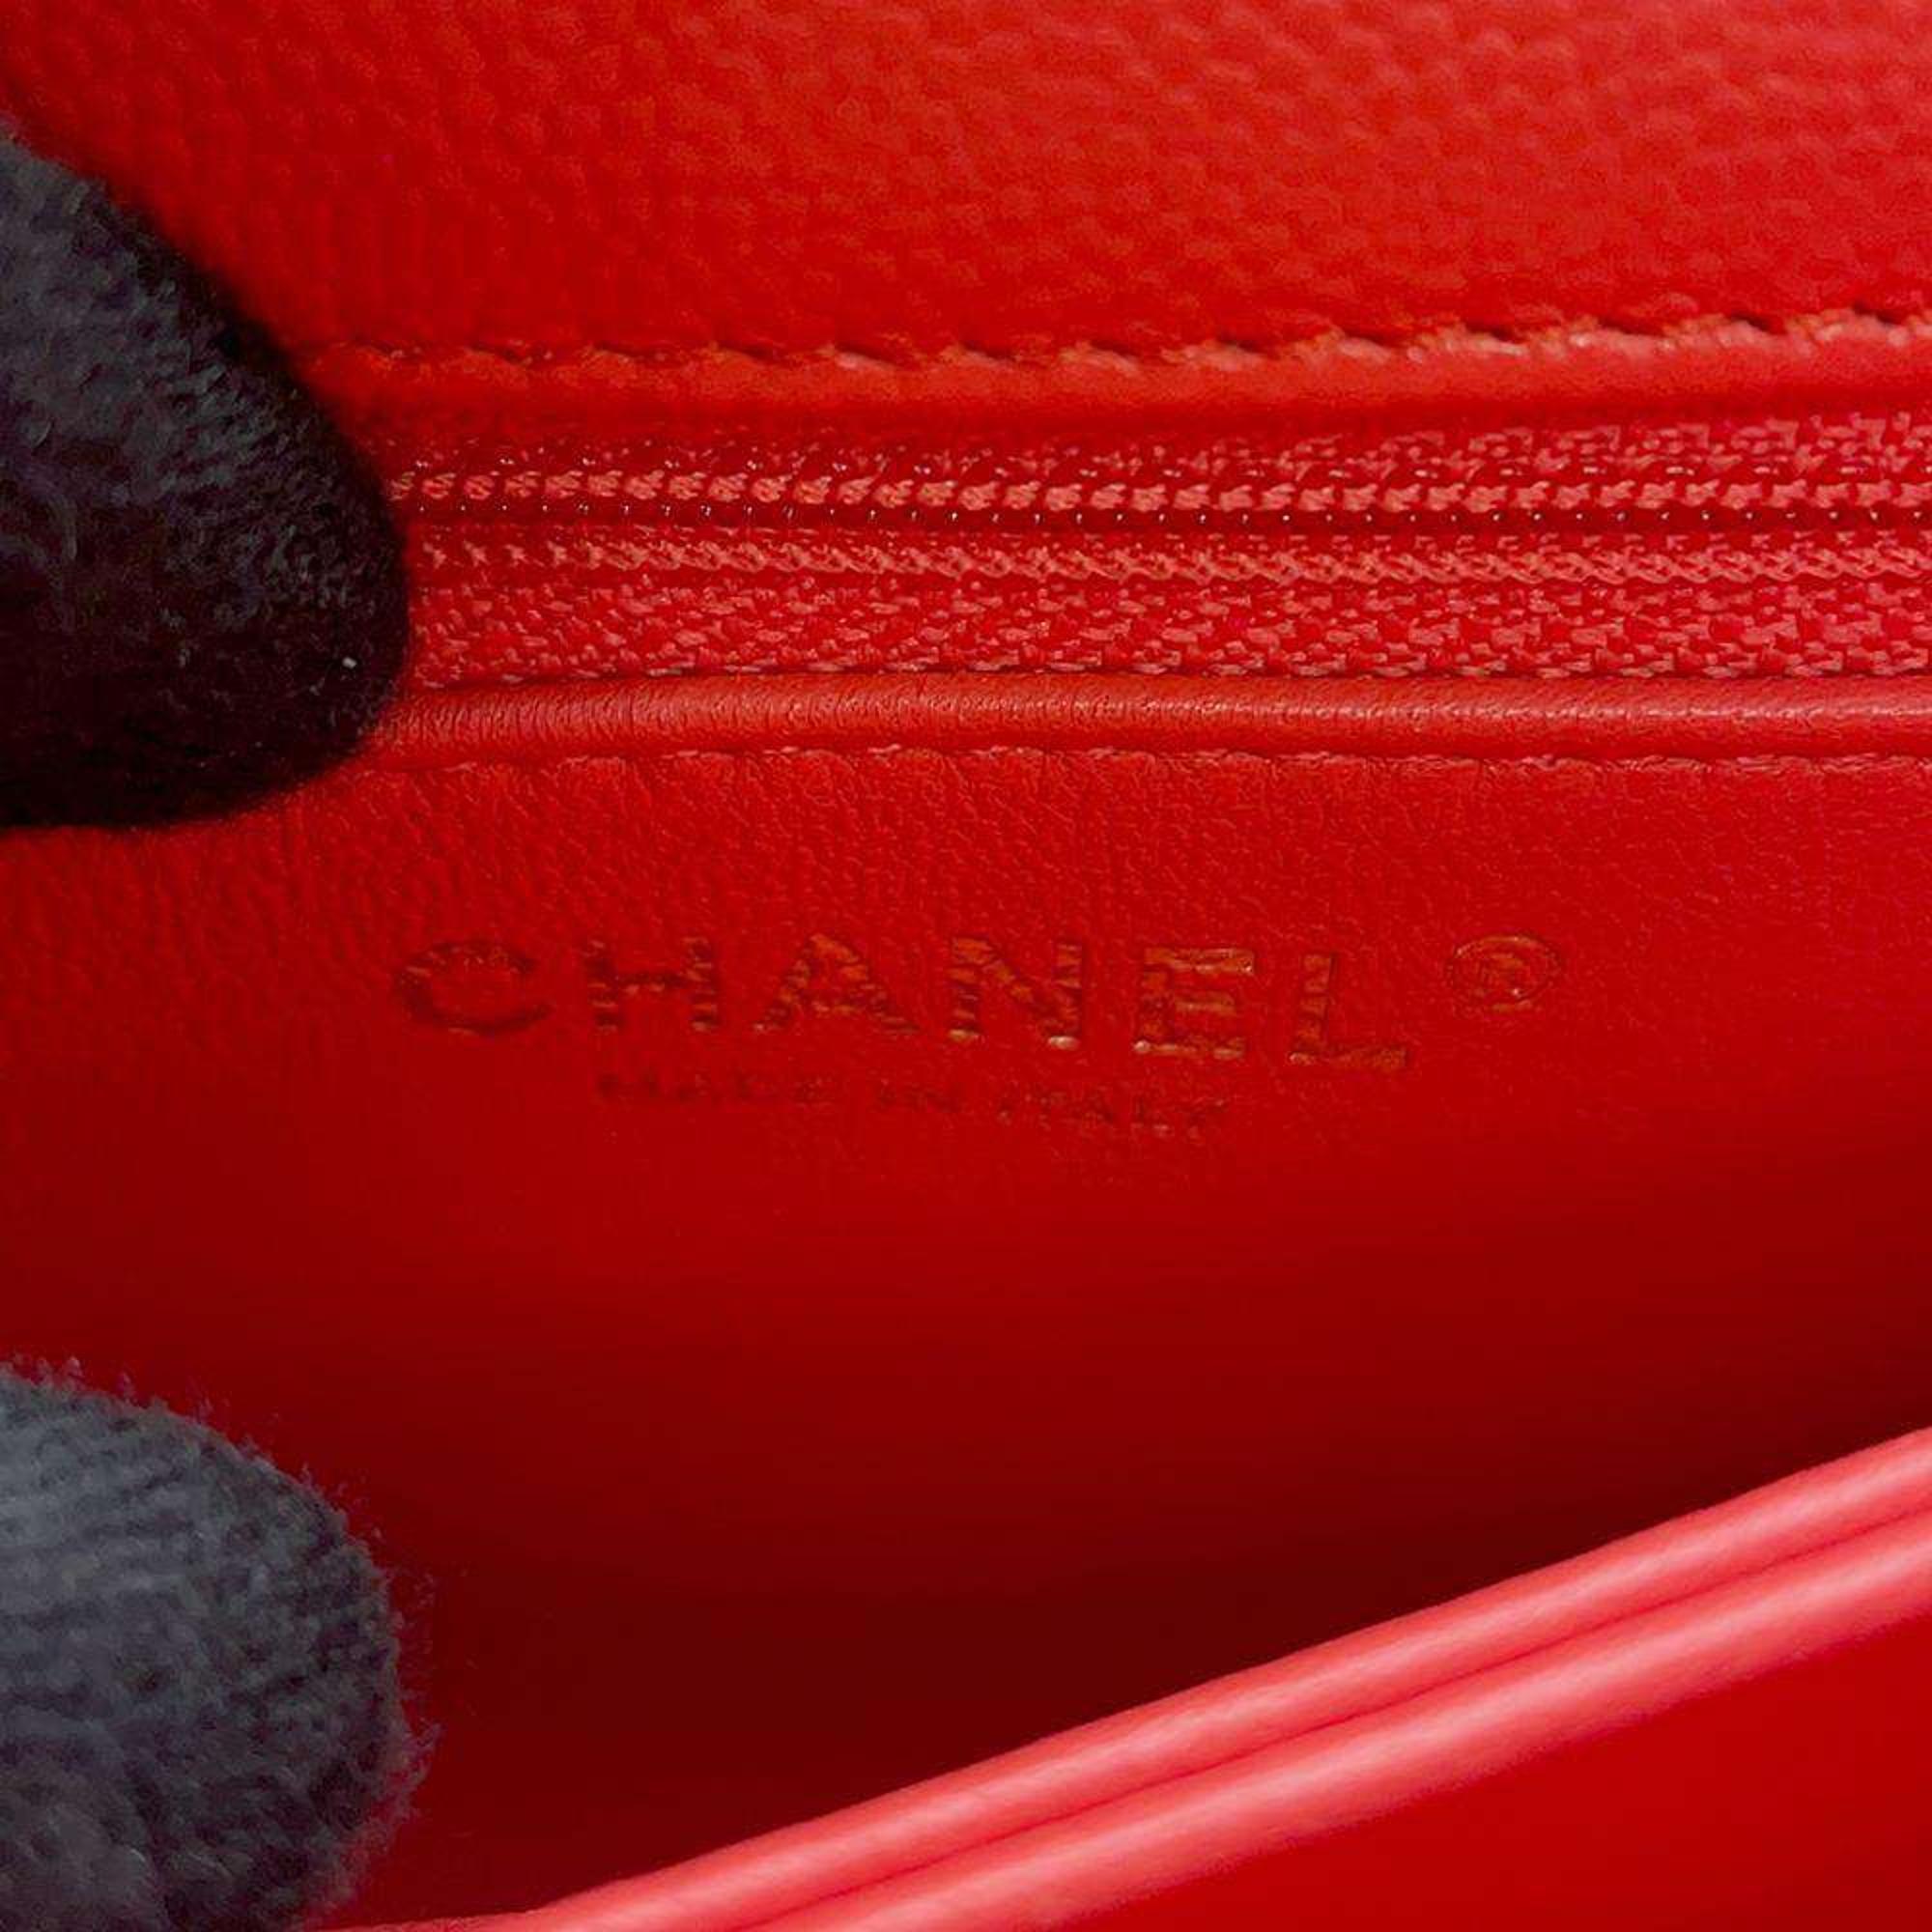 Chanel Red Caviar Leather Coco Top Handle Bag